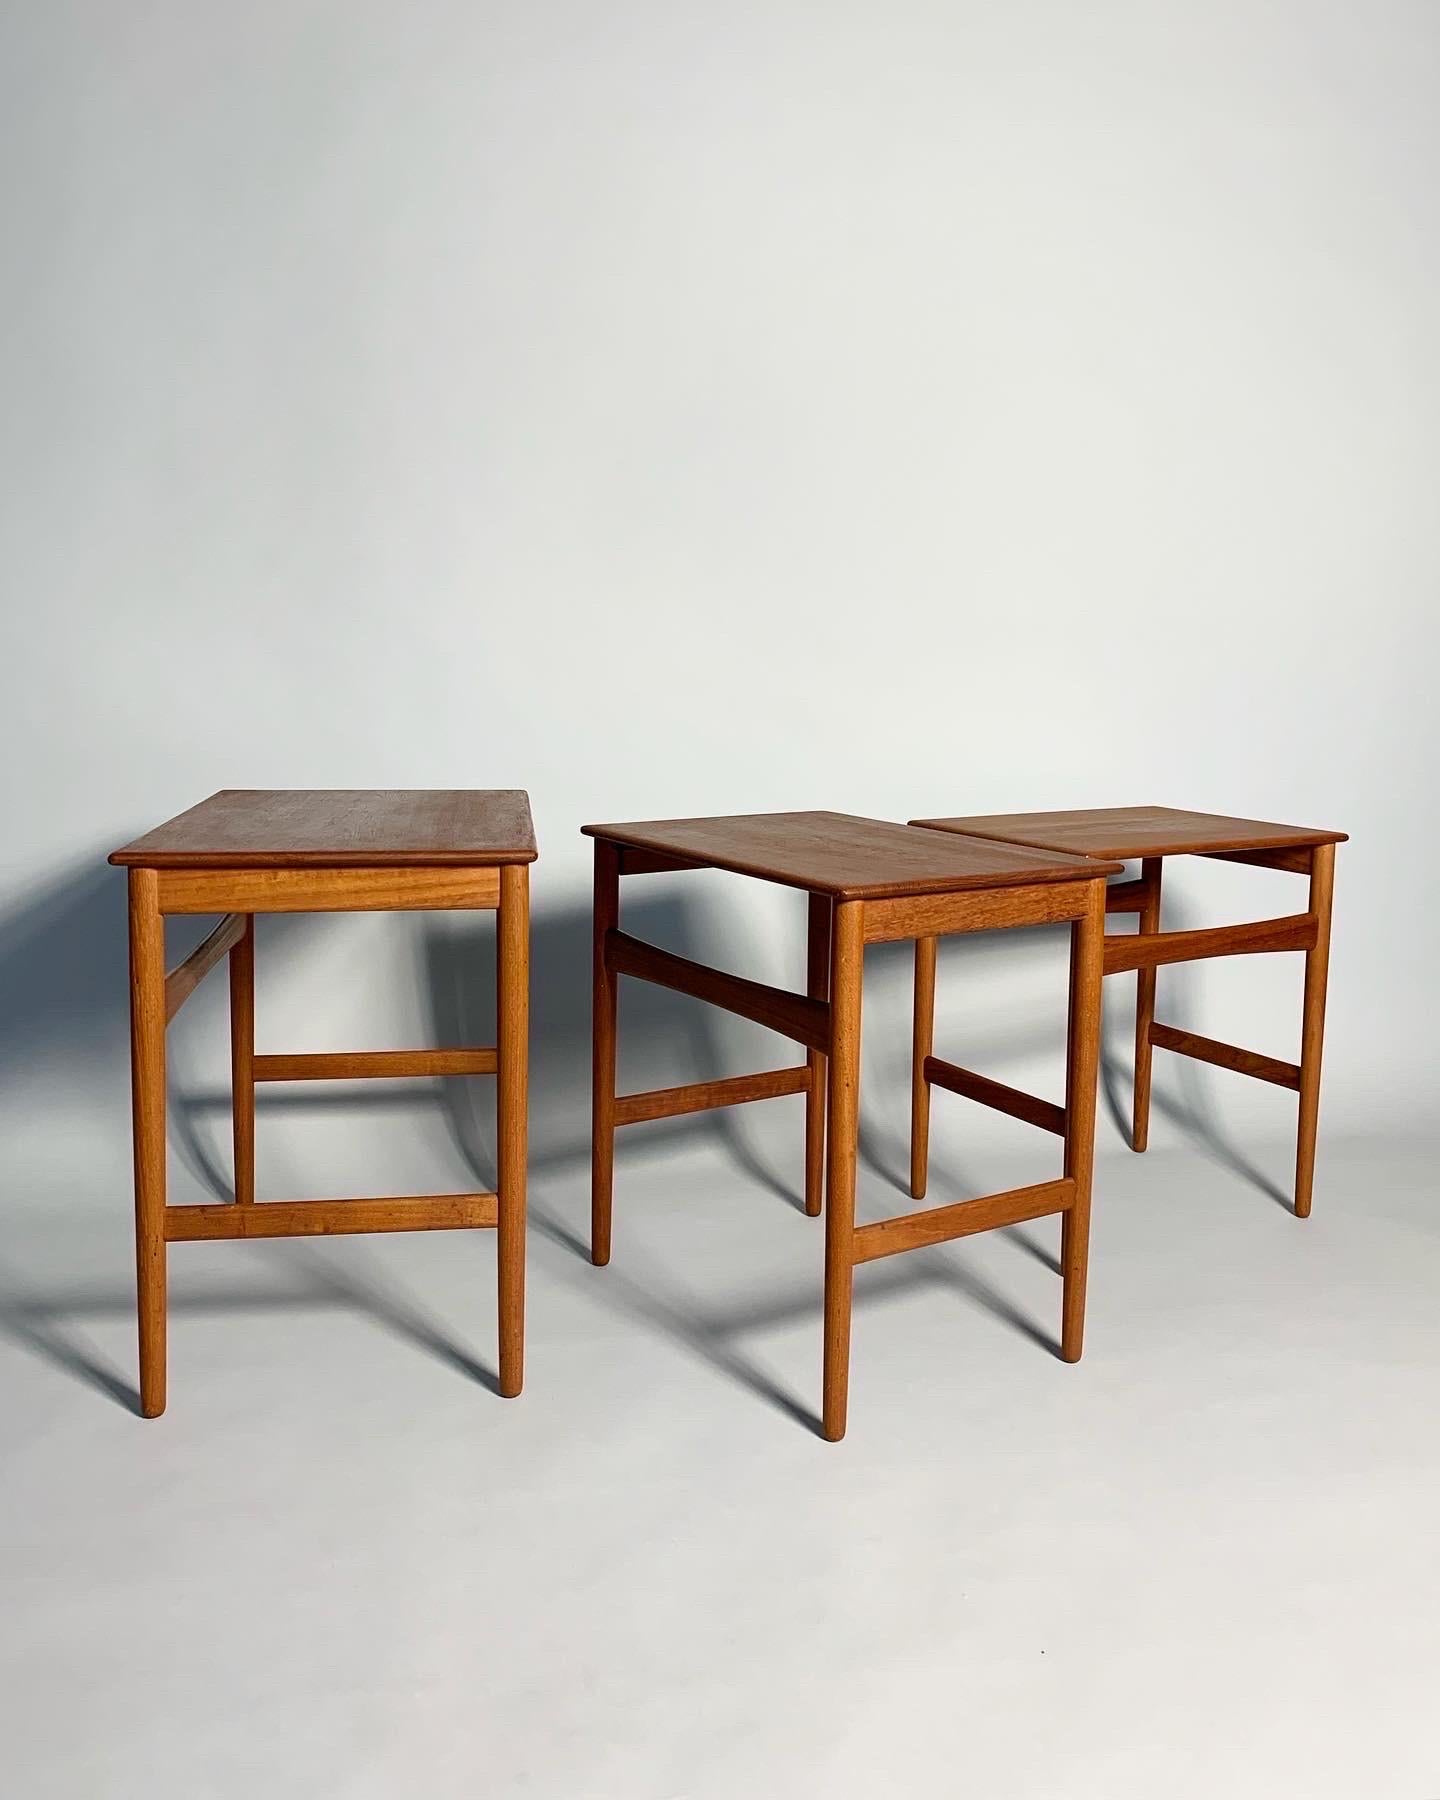 Probably the most beautiful of all Danish nesting tables are these Hans Wegner AT-40, which he designed for Andreas Tuck in Denmark in the 1950s.

The solid teak tops have been refinished, only minimal wear visible. One of the legs was broken and